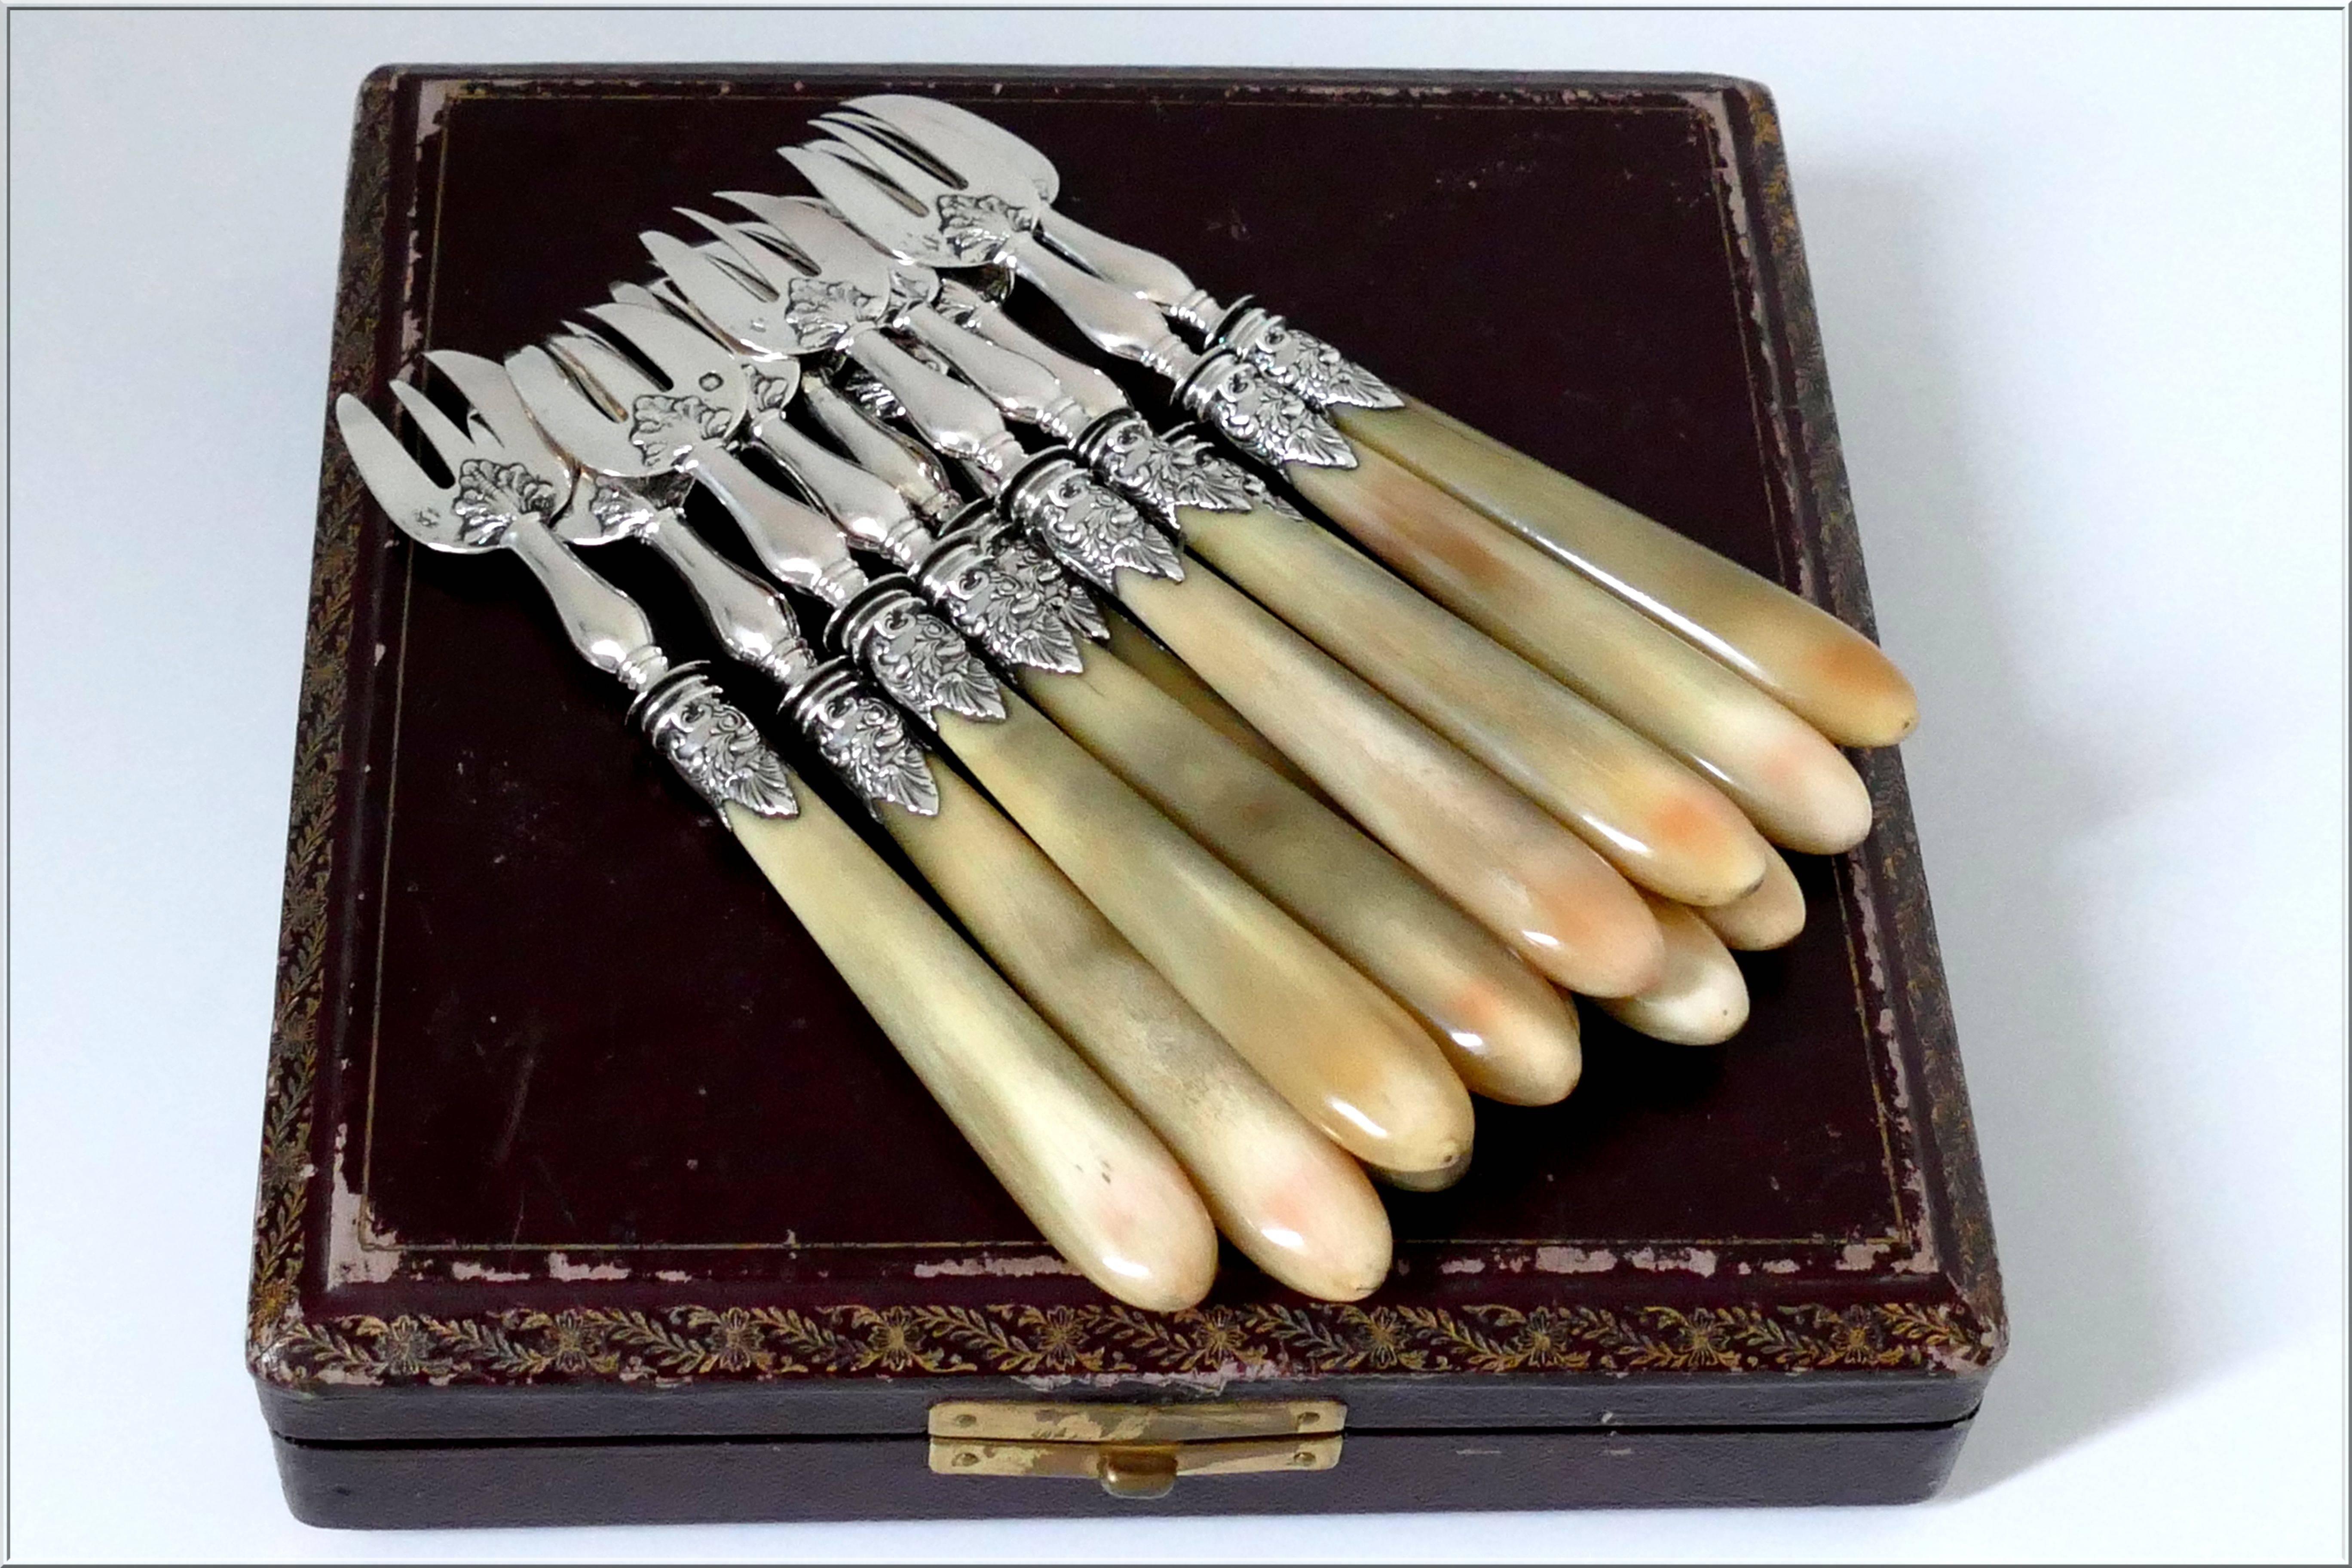 Soufflot French Sterling Silver Horn Oyster Forks Set of 12 Pieces, Original Box 2